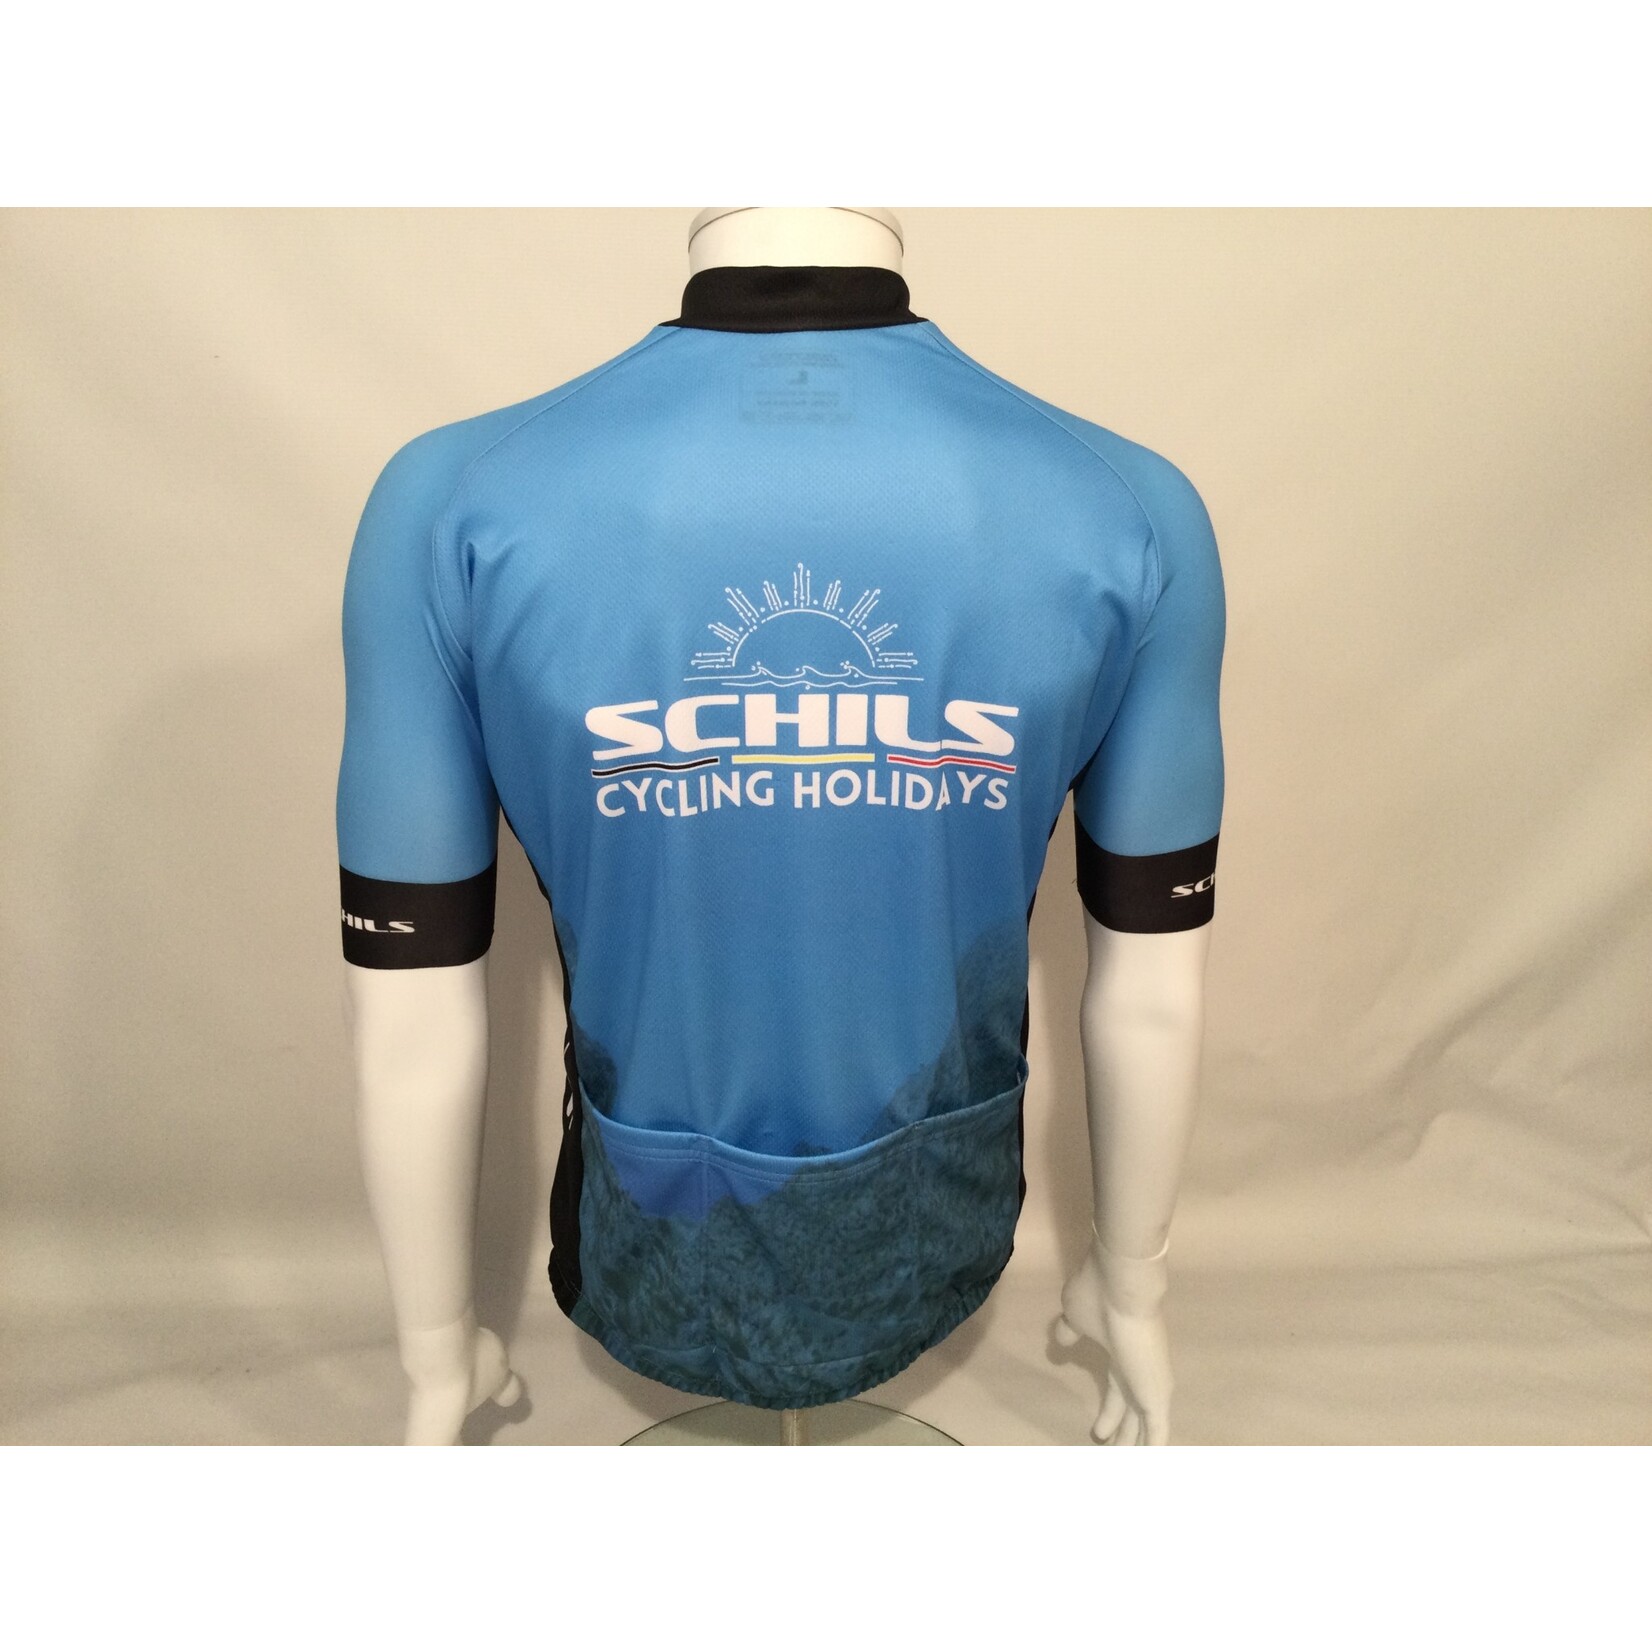 Schils Cycling Holidays Short Sleeved Jersey